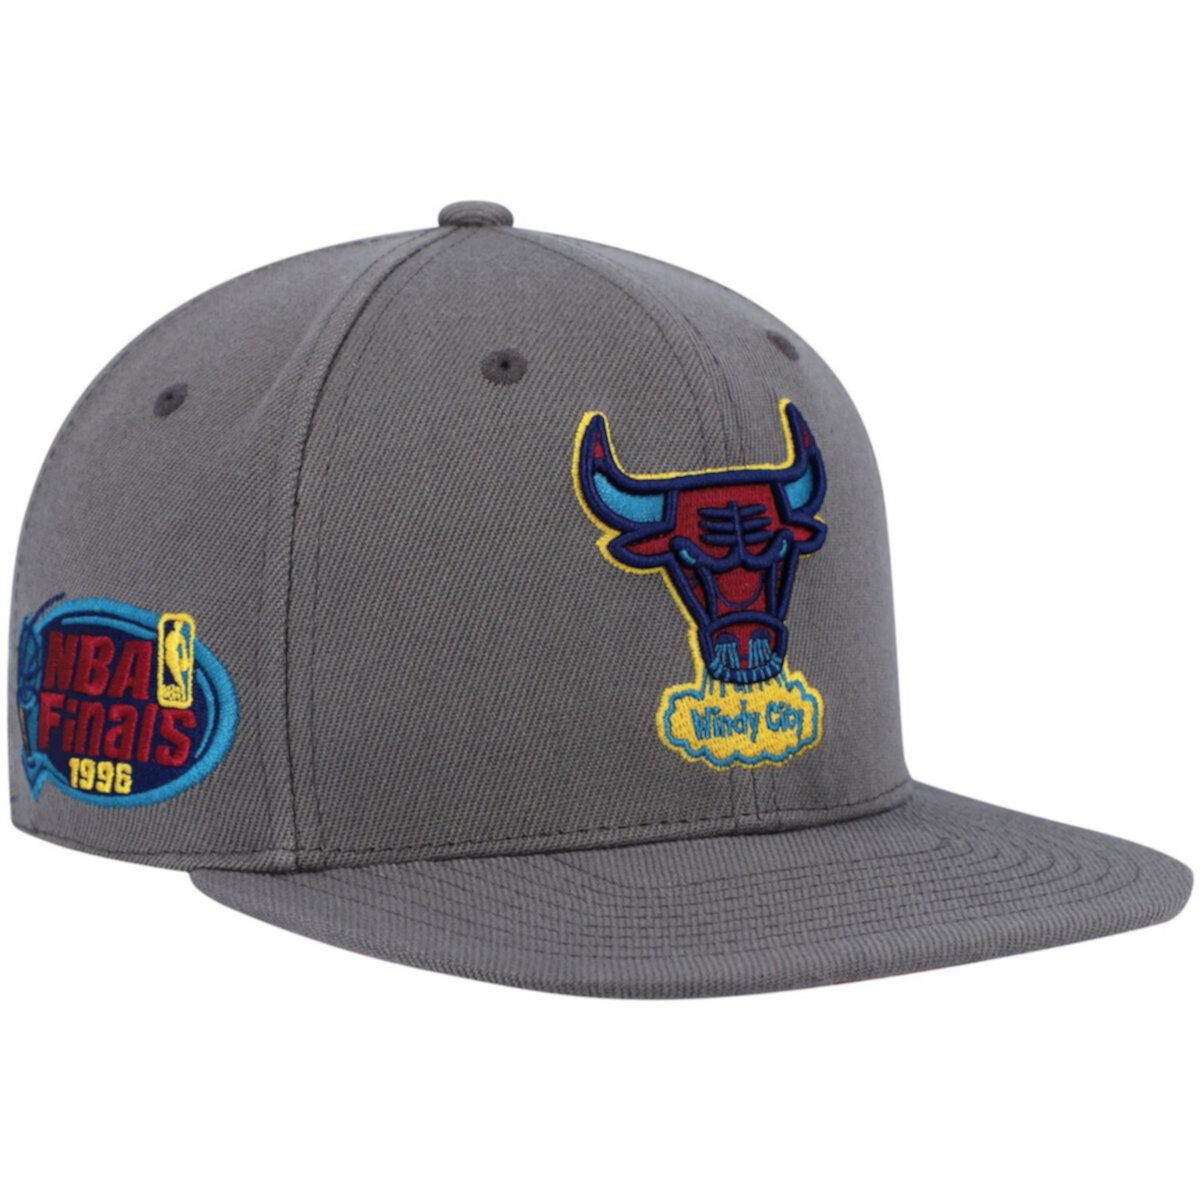 Men's Mitchell & Ness Charcoal Chicago Bulls Hardwood Classics 1996 NBA Finals Carbon Cabernet Fitted Hat Mitchell & Ness